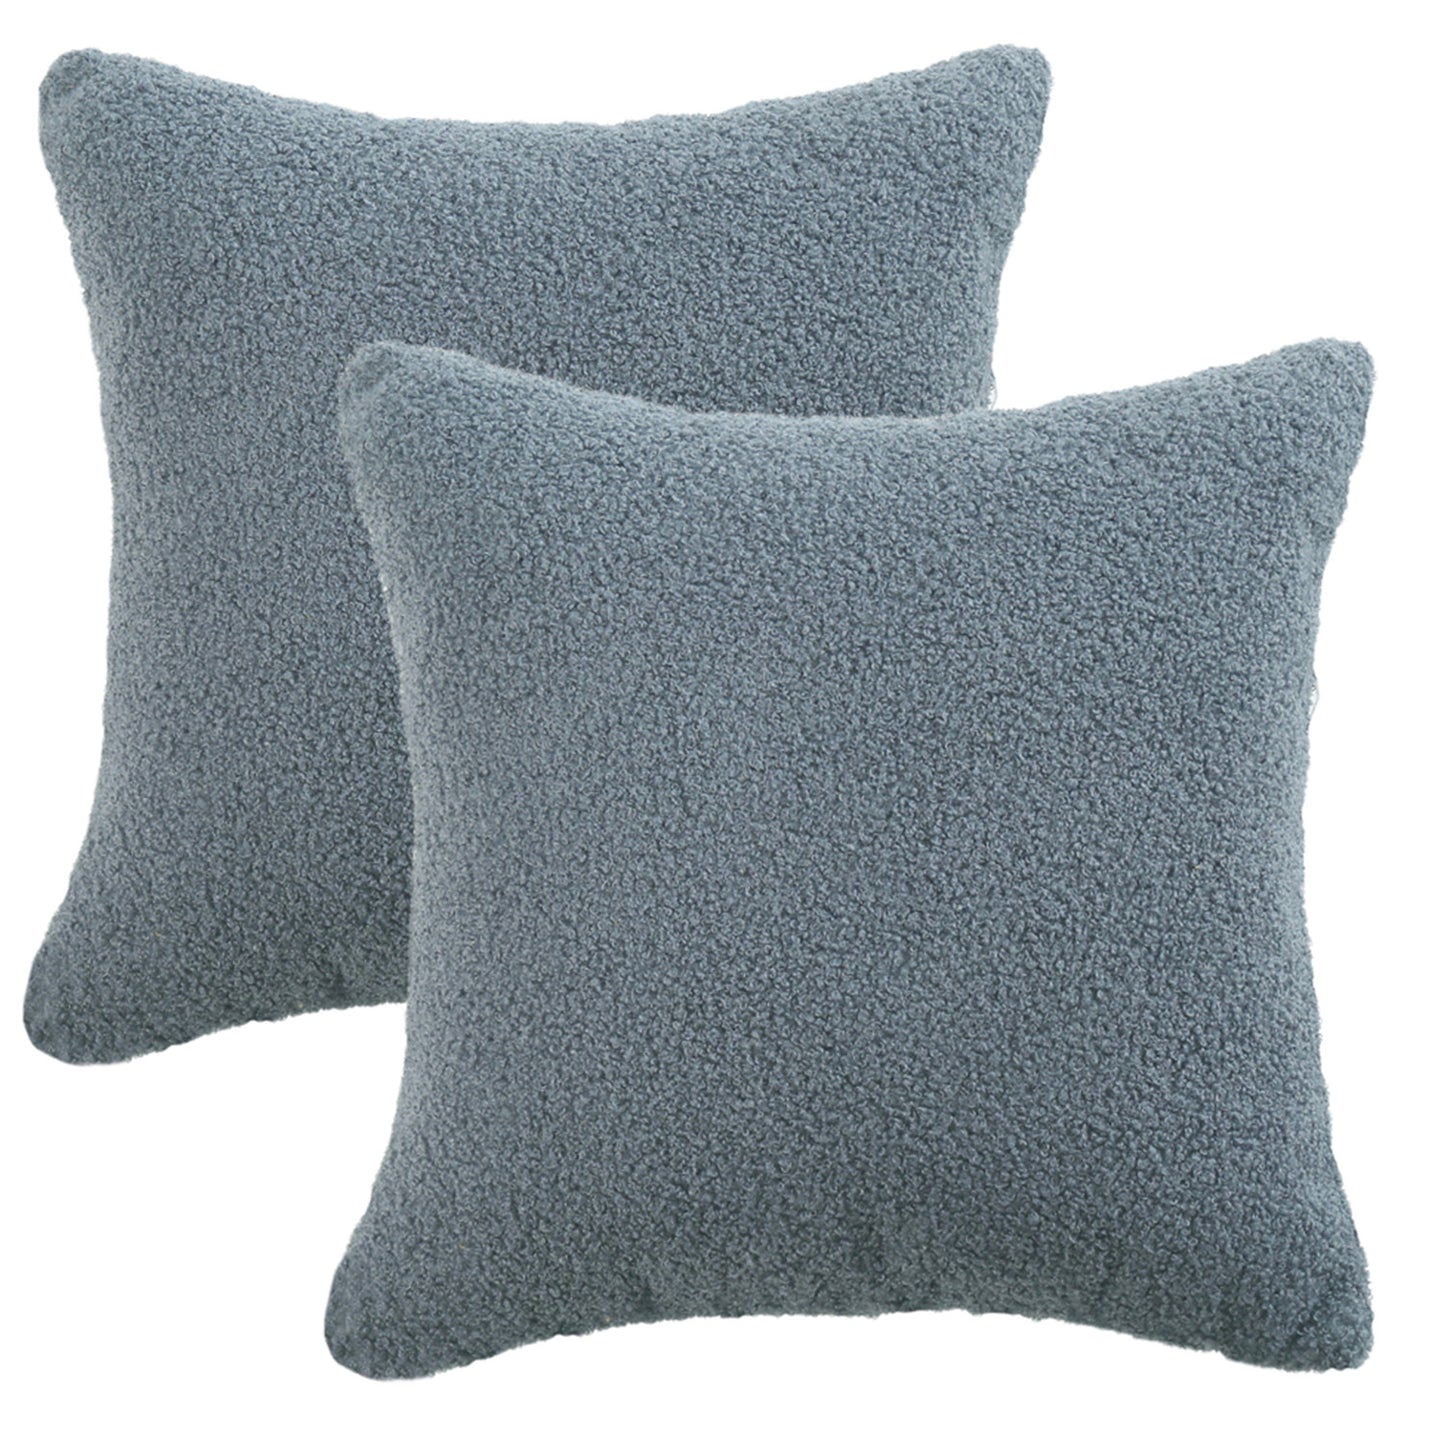 Plush Pillow Covers,Pack of 2, 18x18 inch Solid and Square for Bedroom